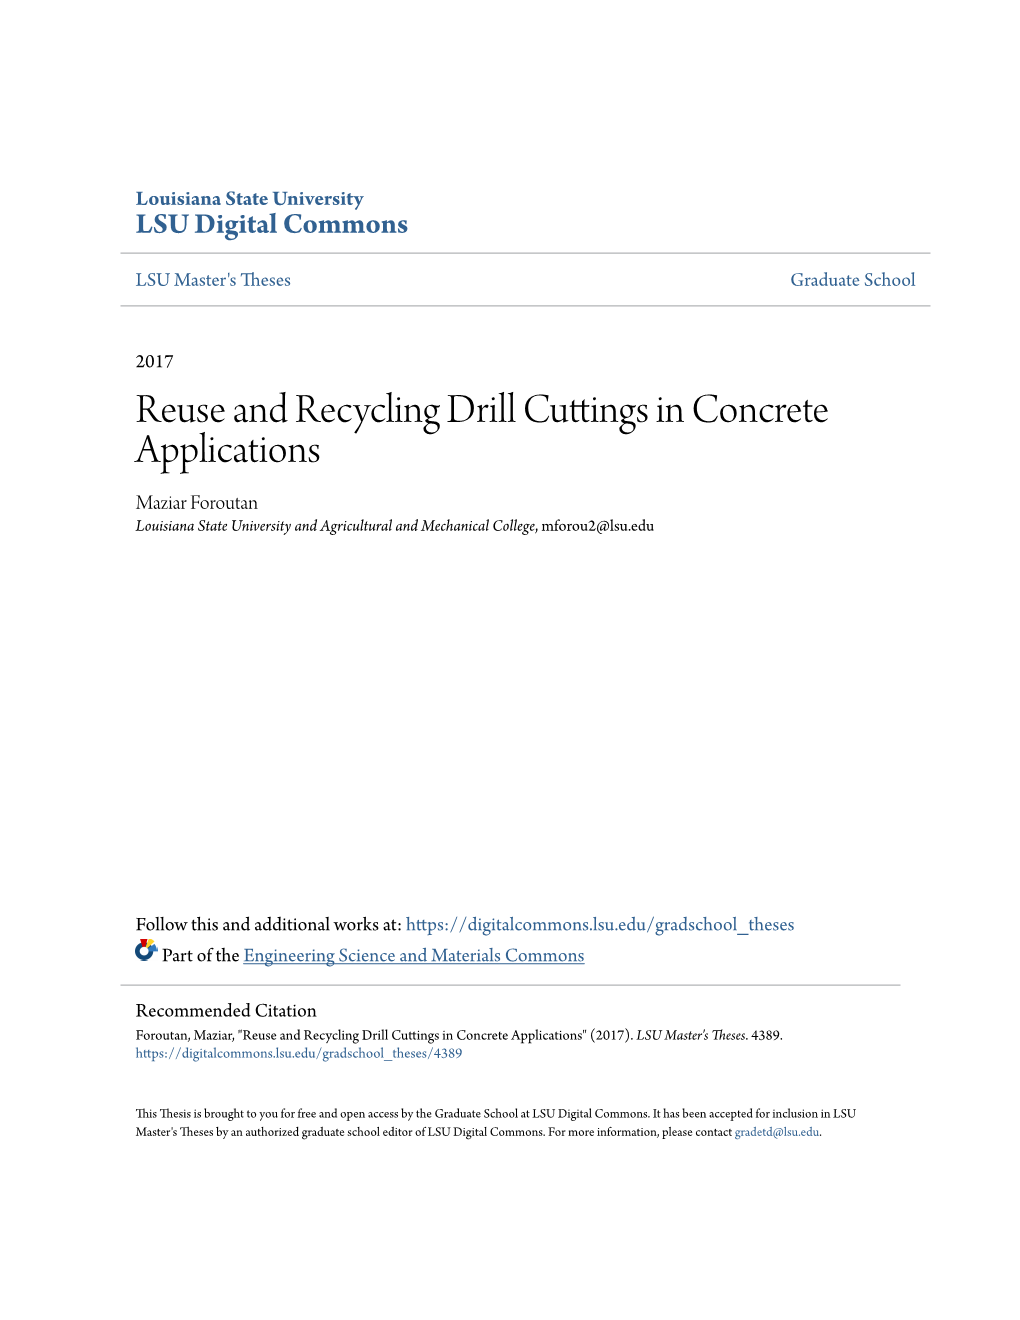 Reuse and Recycling Drill Cuttings in Concrete Applications Maziar Foroutan Louisiana State University and Agricultural and Mechanical College, Mforou2@Lsu.Edu